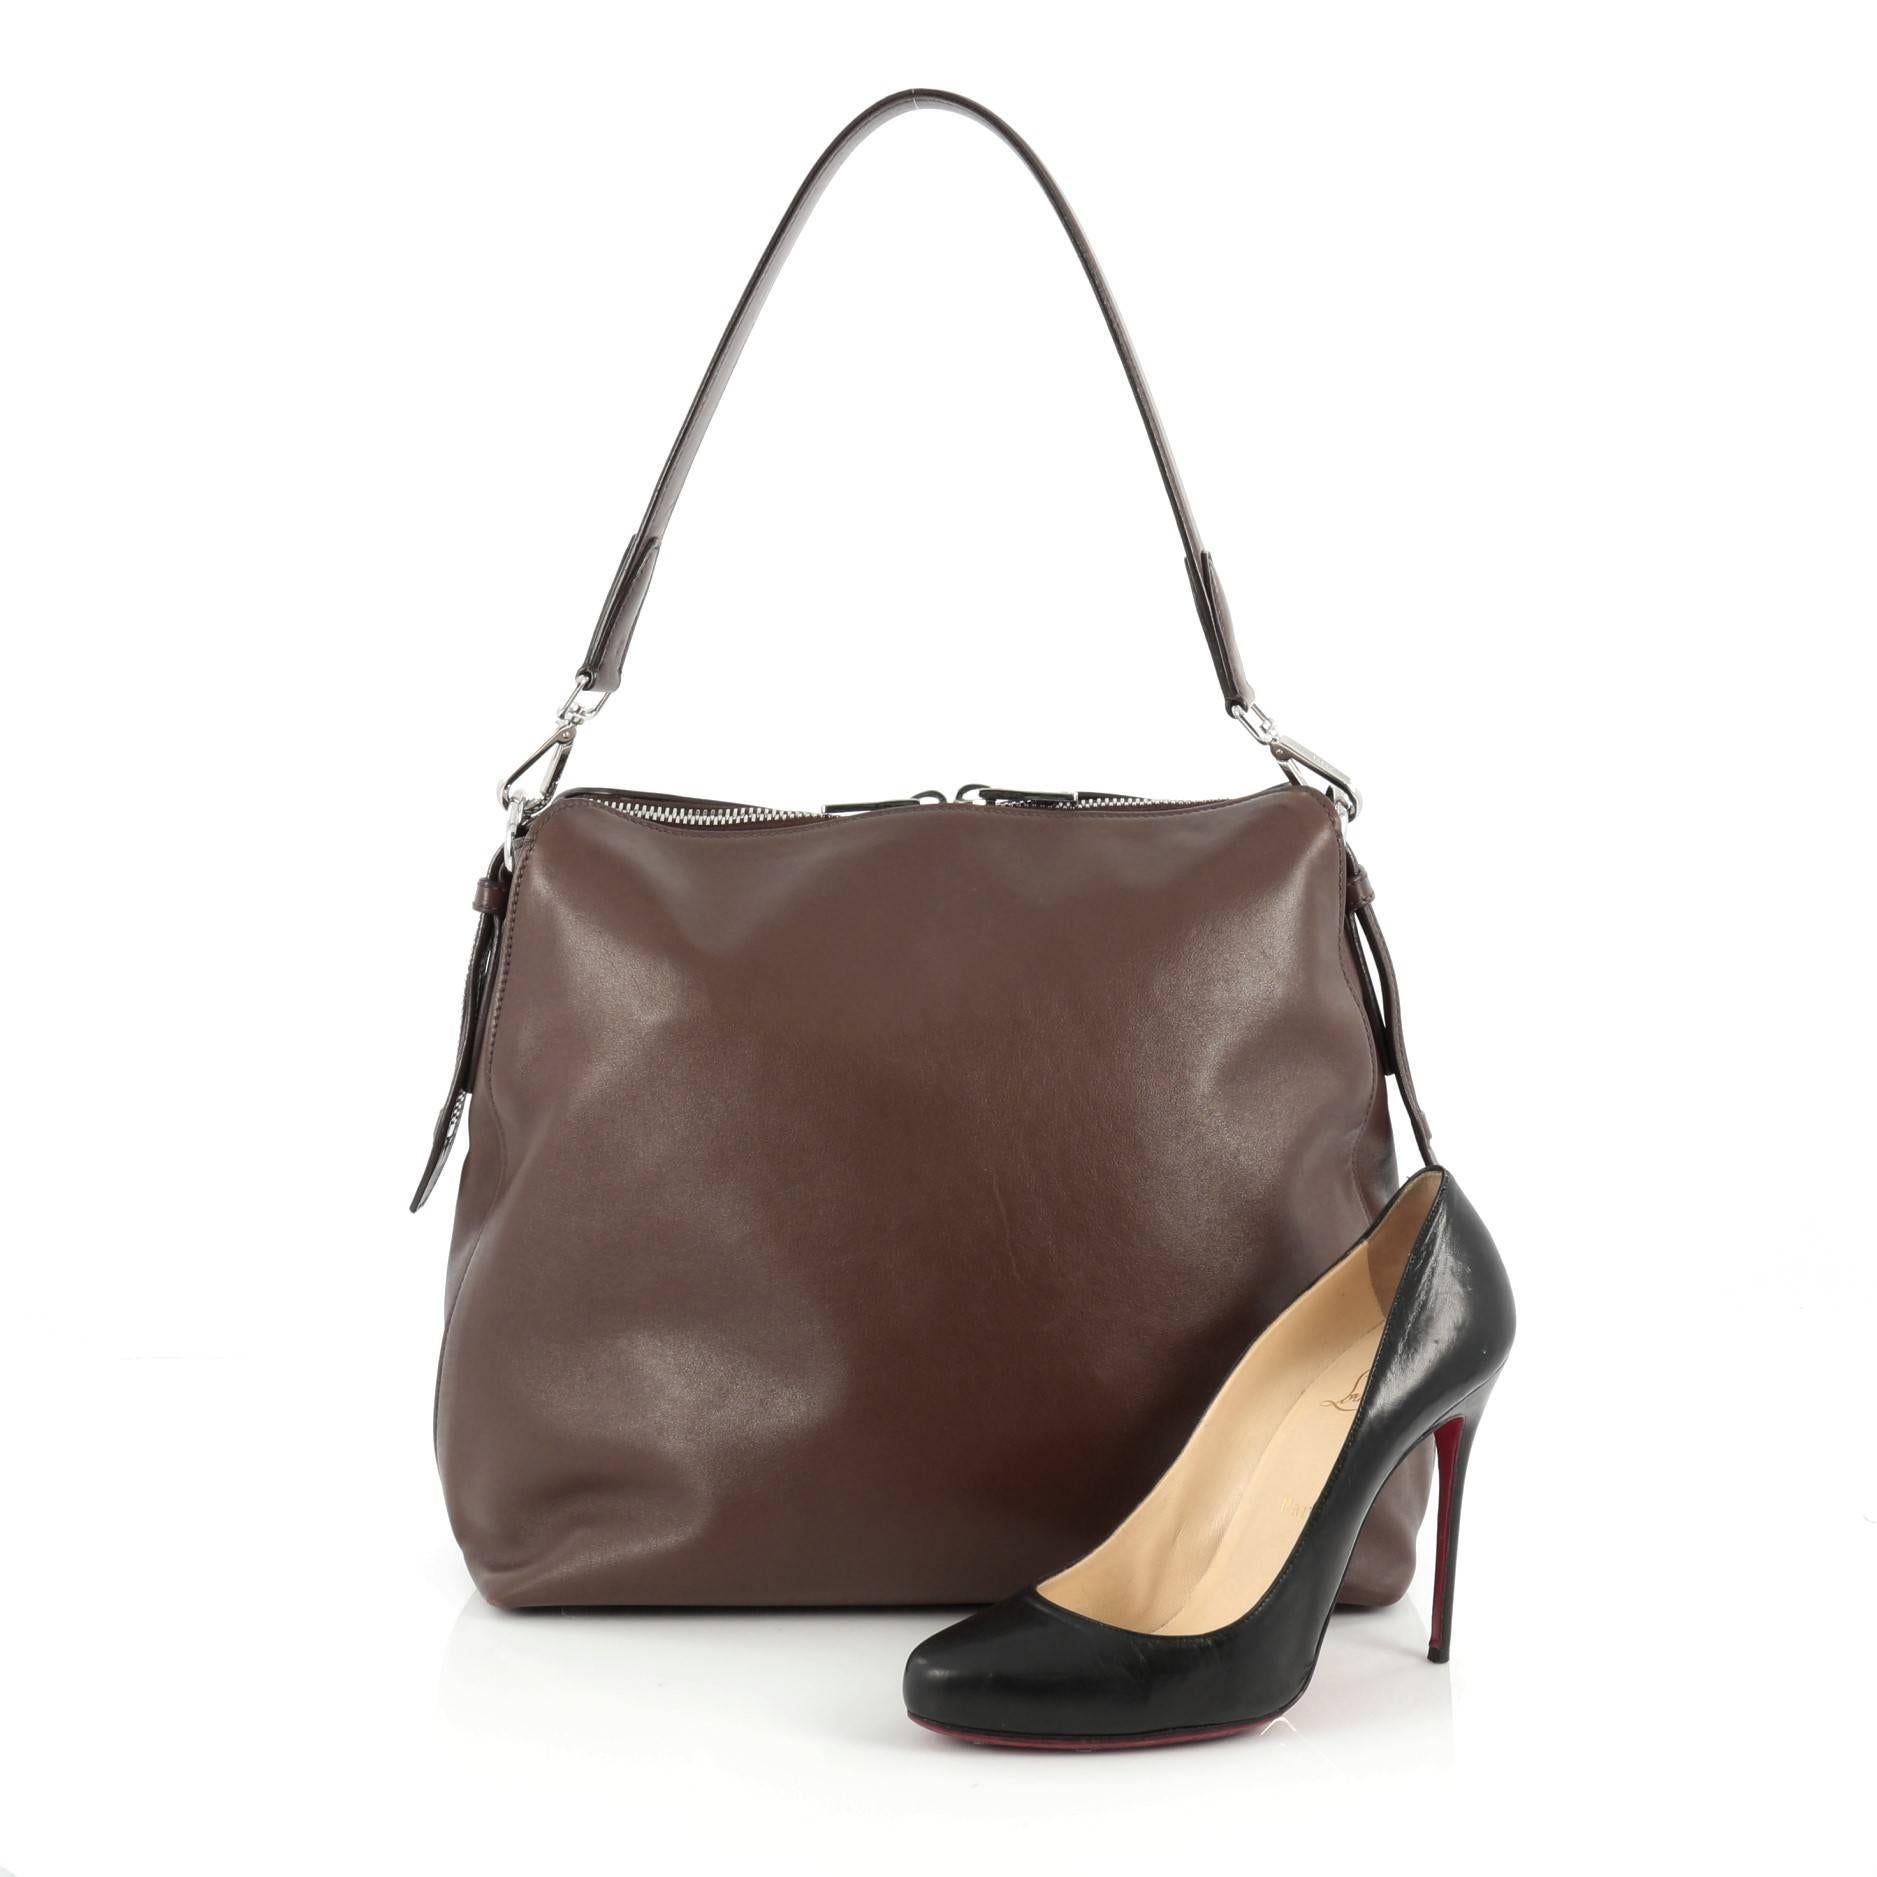 This authentic Prada Zip Top Hobo Soft Calfskin Large is a classic and practical bag made for everyday excursions. Constructed in brown calfskin leather, this simple hobo features a flat leather shoulder strap, Prada logo, protective base studs and